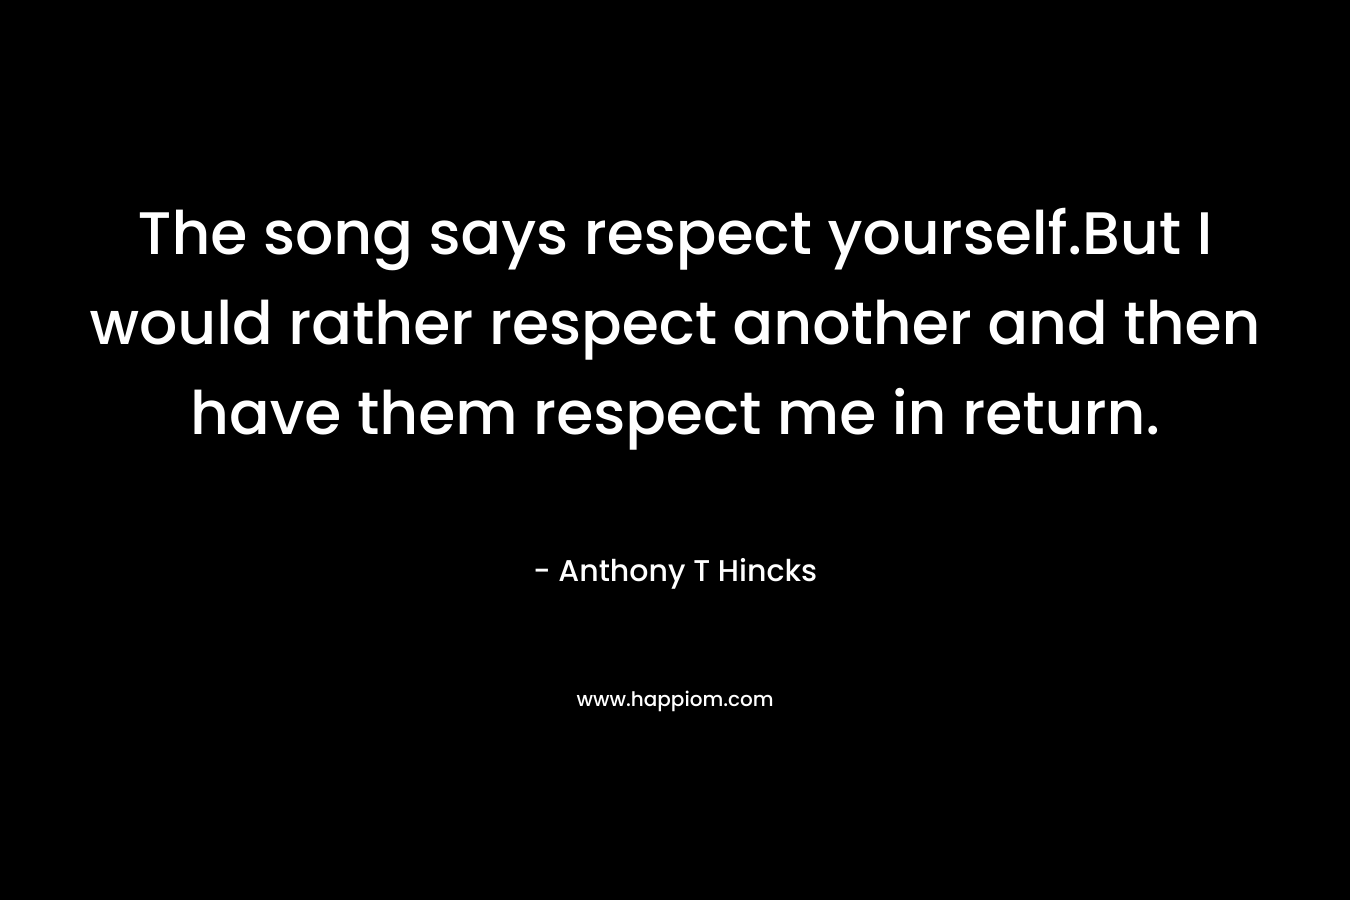 The song says respect yourself.But I would rather respect another and then have them respect me in return.